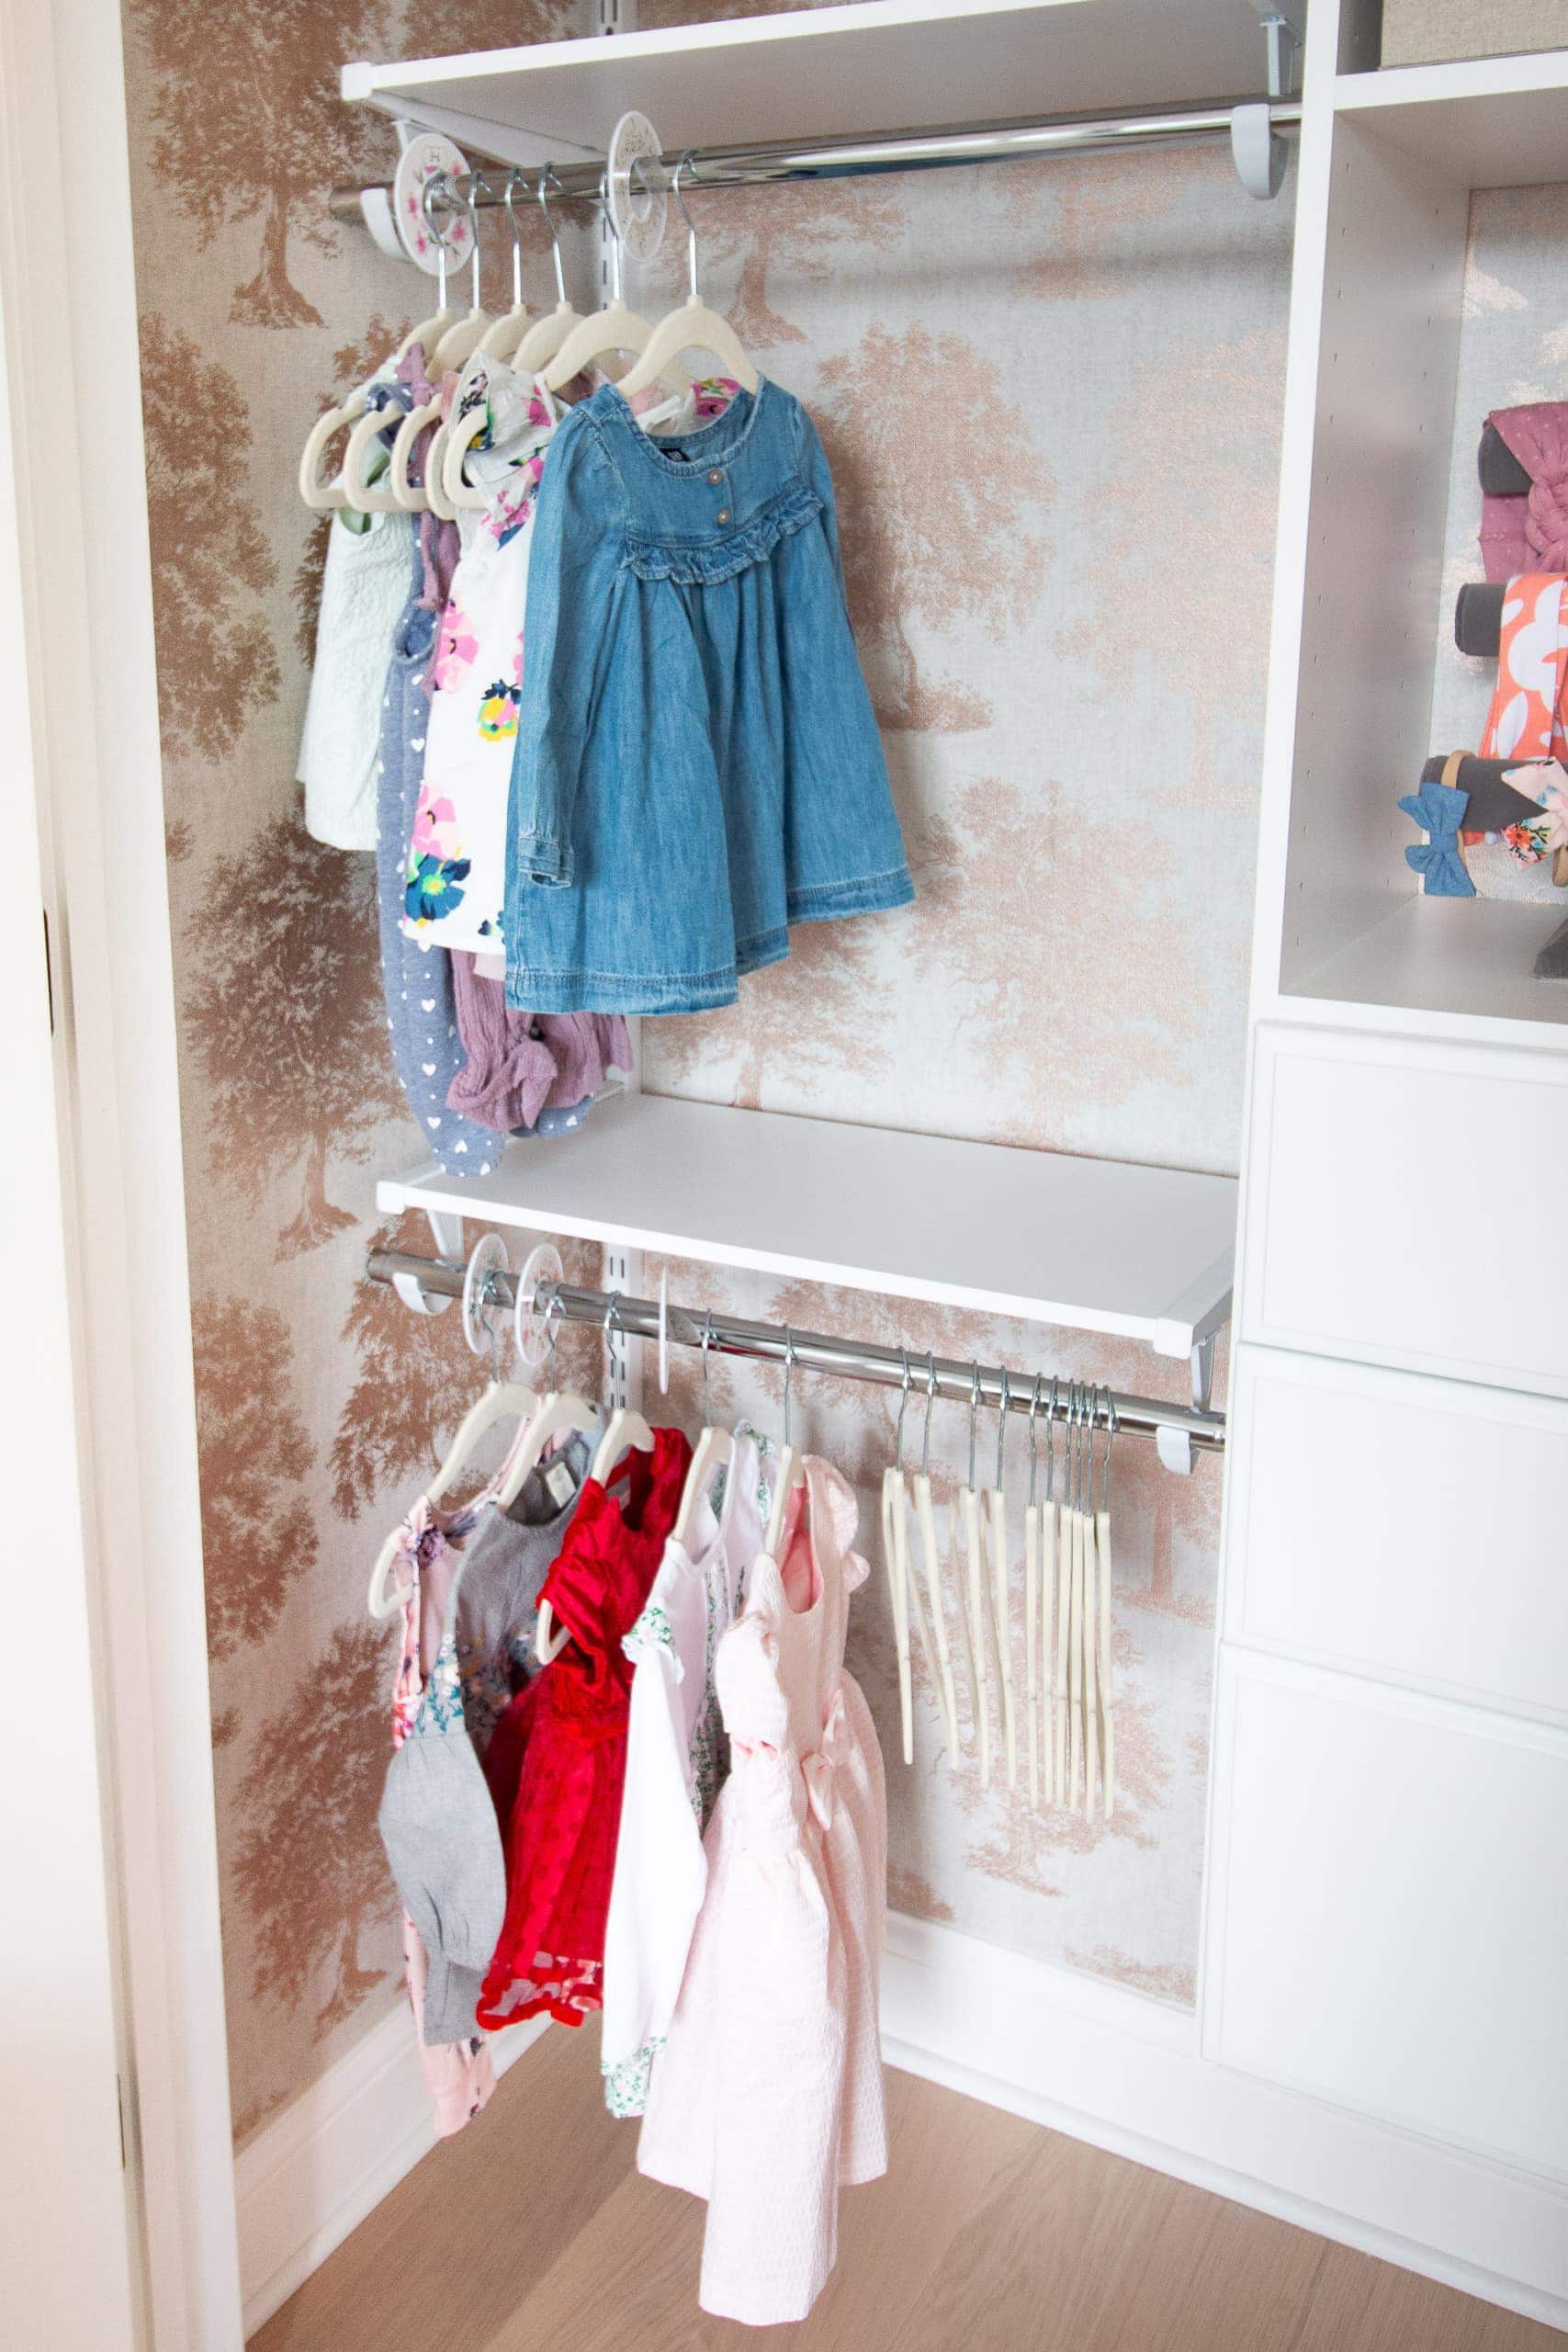 Rubbermaid shelves and rods in this organized nursery closet